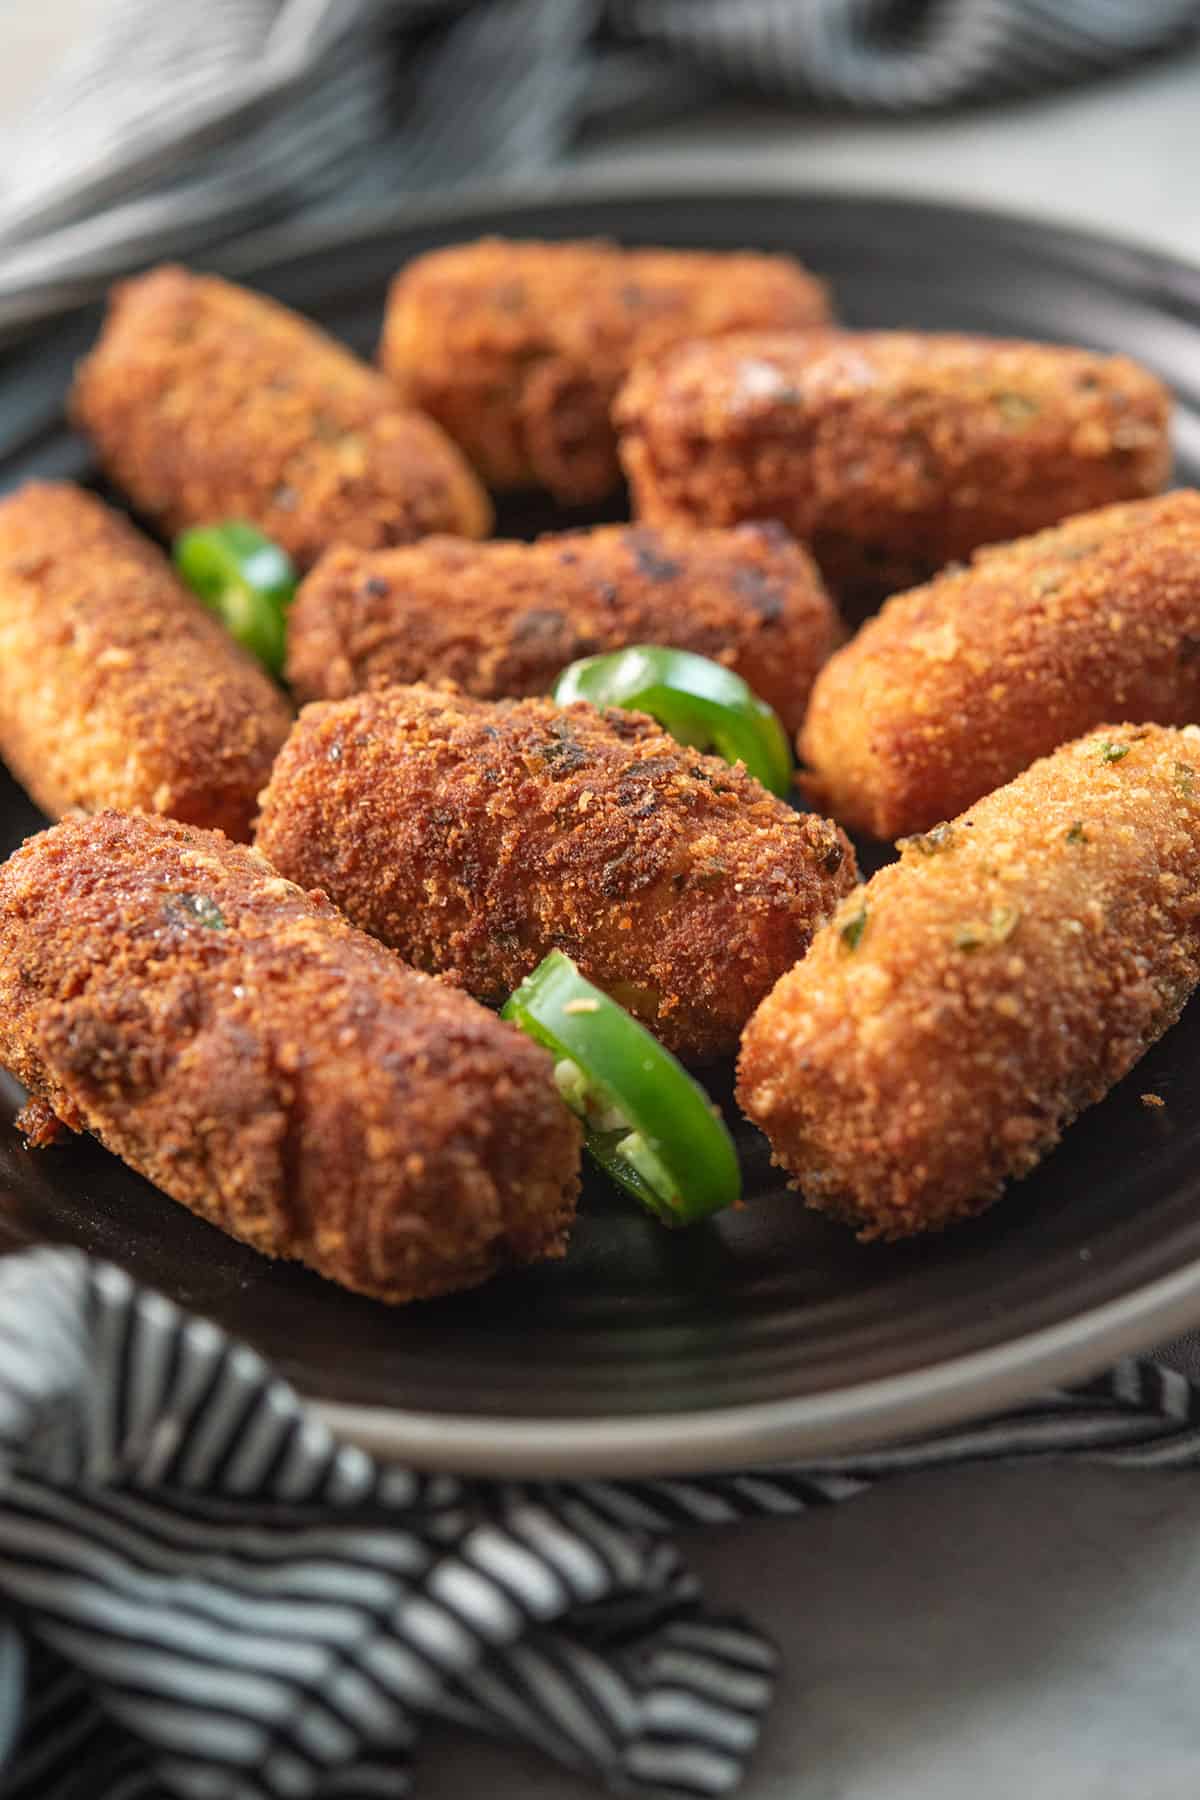 Jalapeno cheese sticks recipe yields crunchy and cheesy snack